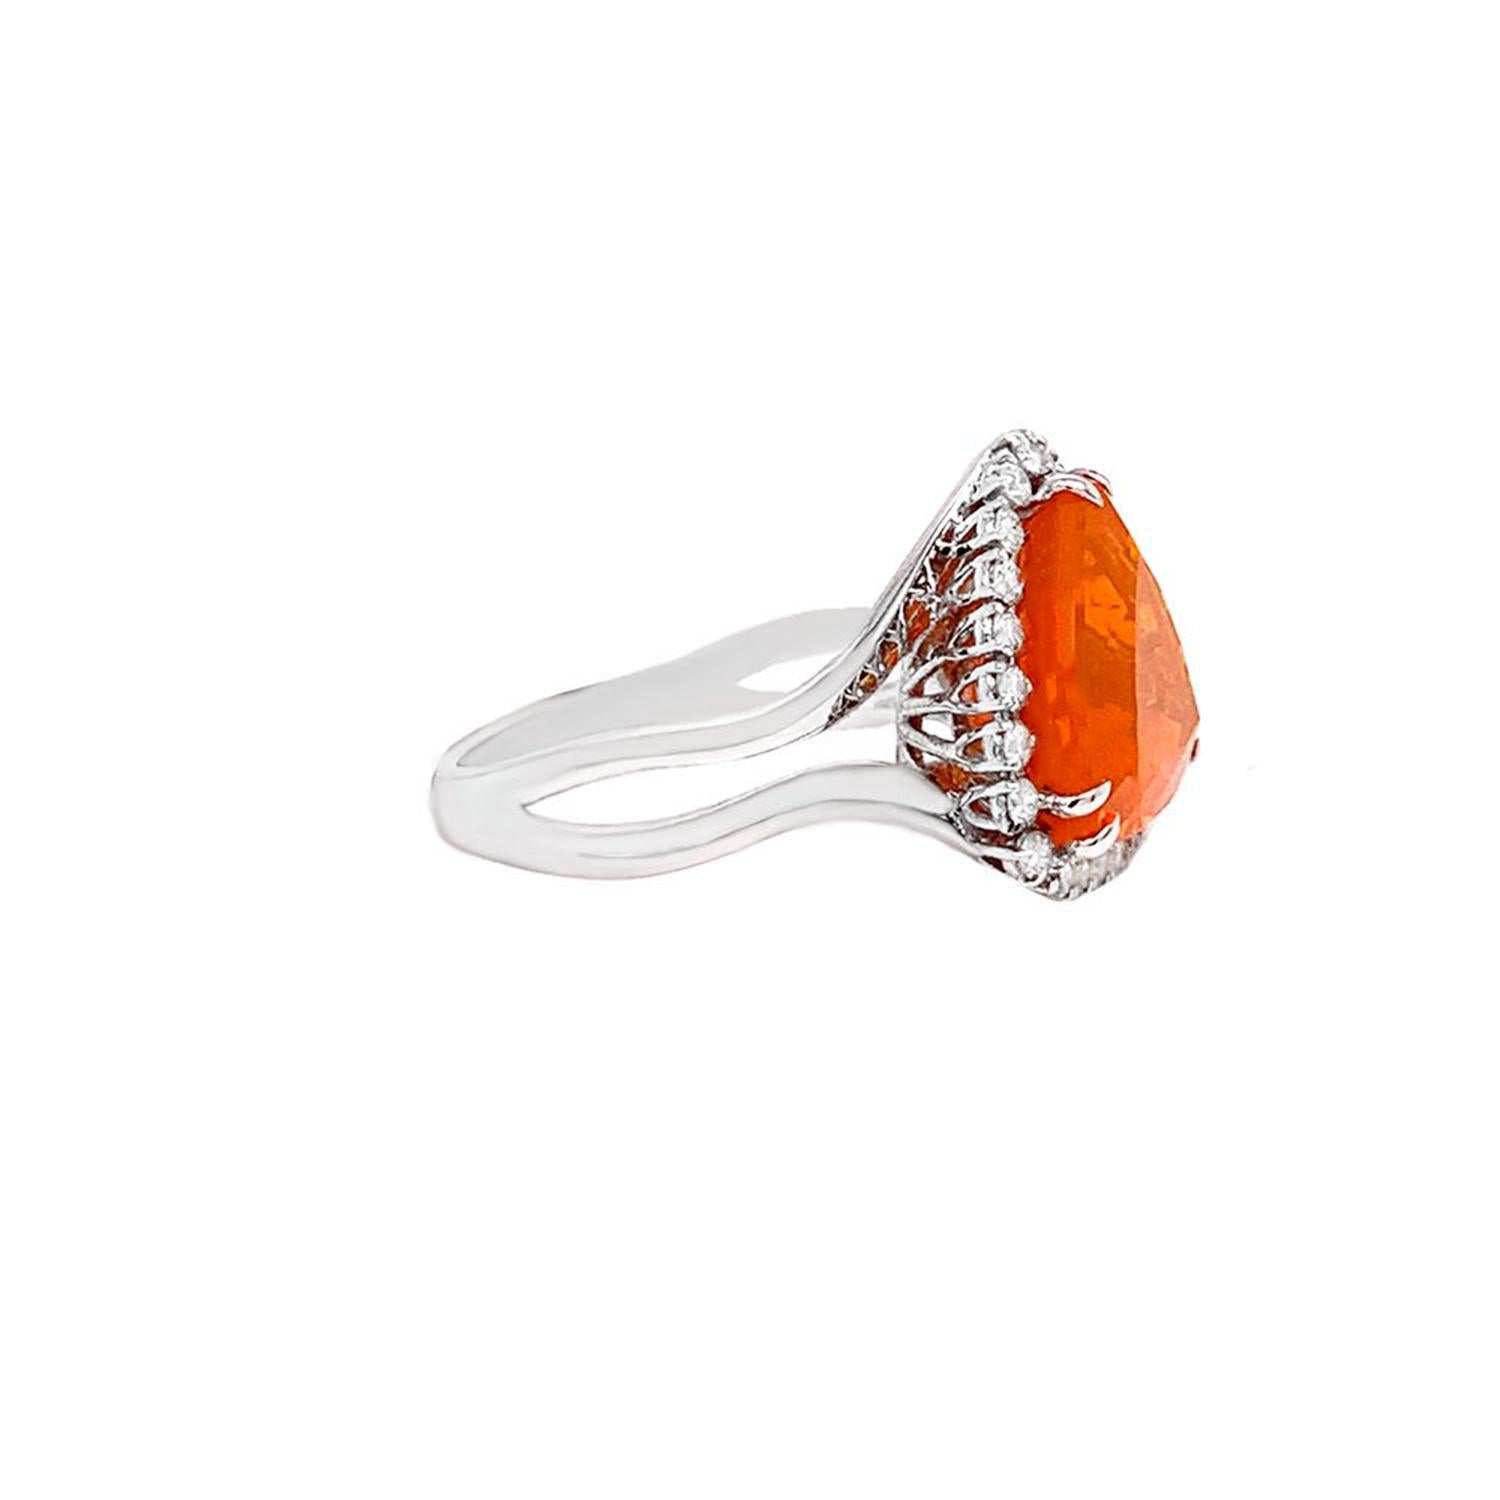 Fire Opal Ring With Diamonds 4.14 Carats 14K White Gold In Excellent Condition For Sale In Laguna Niguel, CA